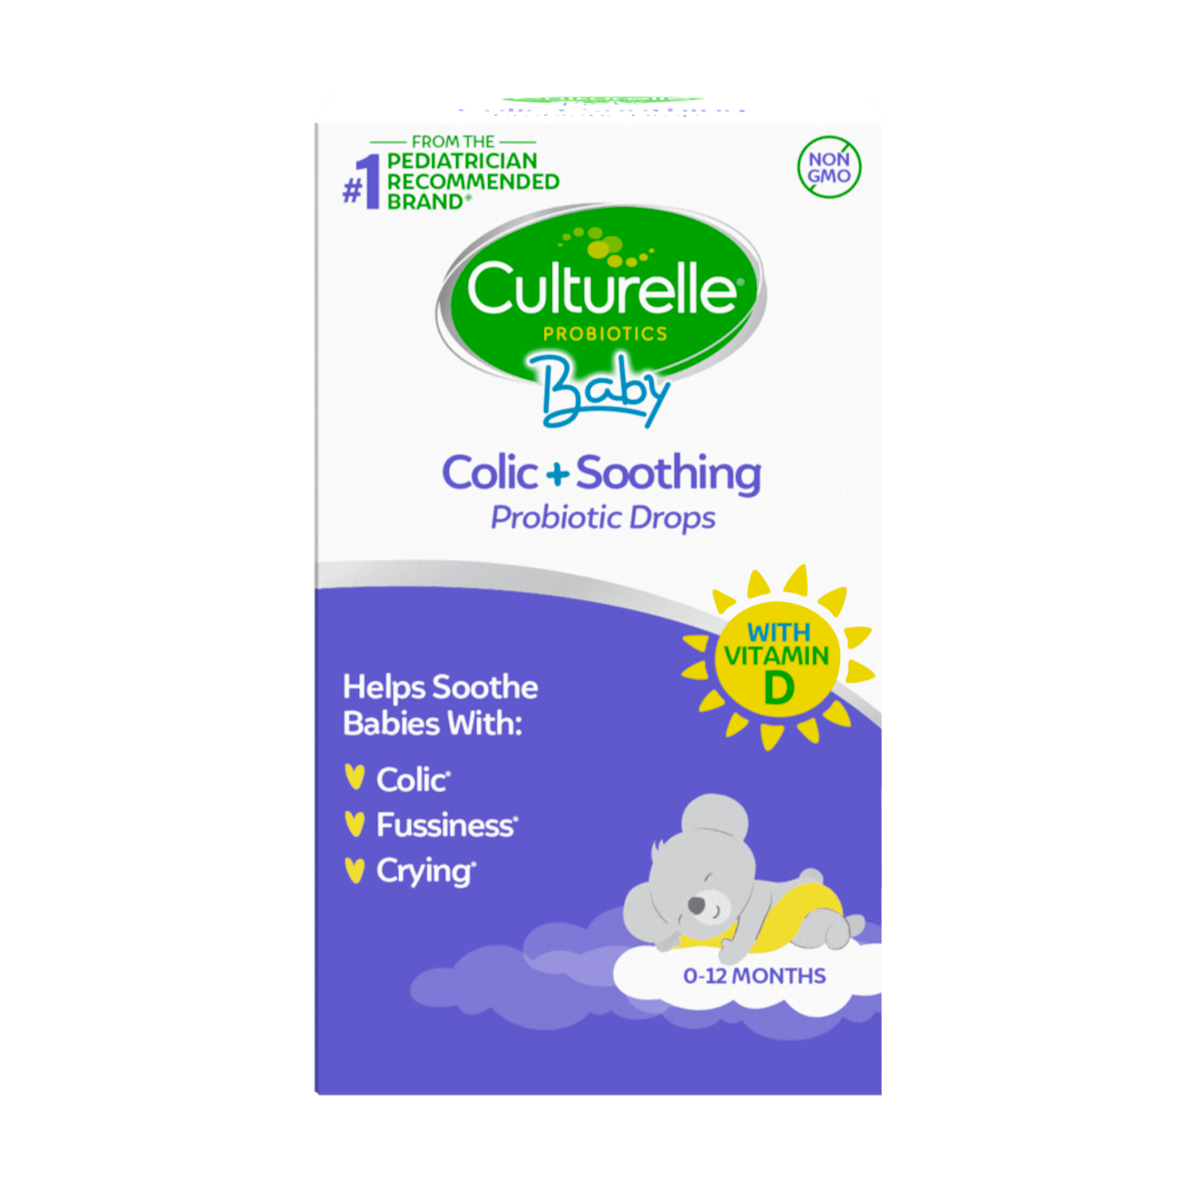 baby colic + soothing probiotic drops packaging front